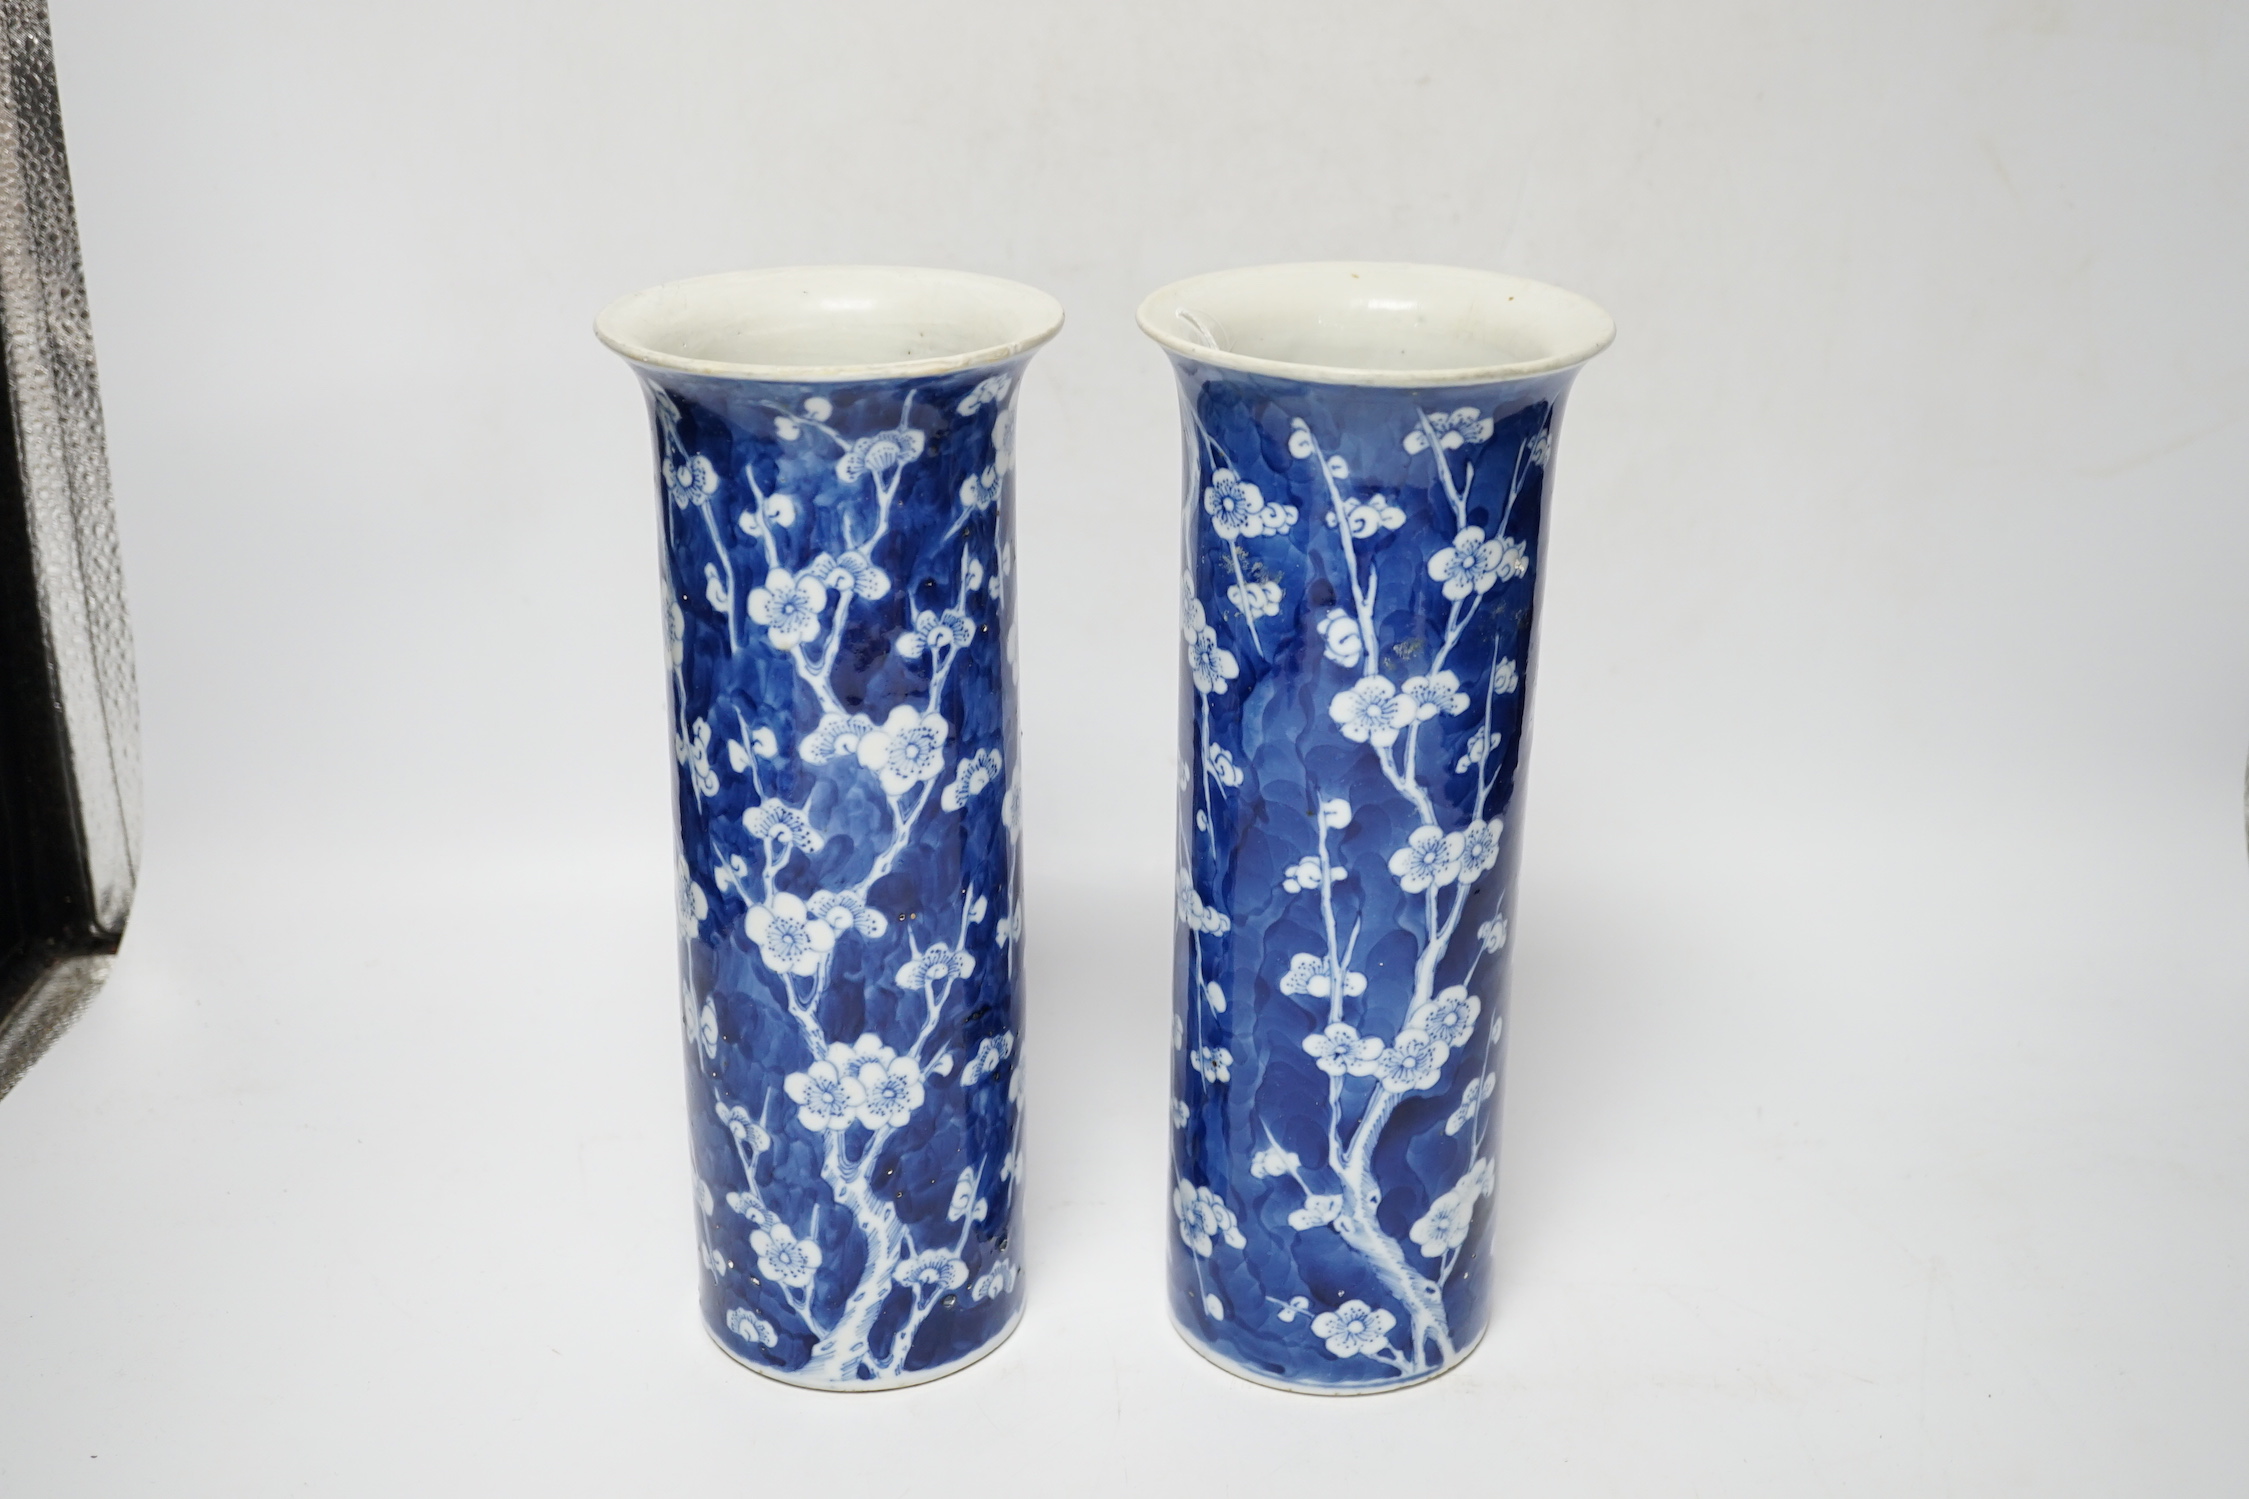 A pair of Chinese blue and white prunus flower sleeve vases, c.1900, (restored), 26cm high